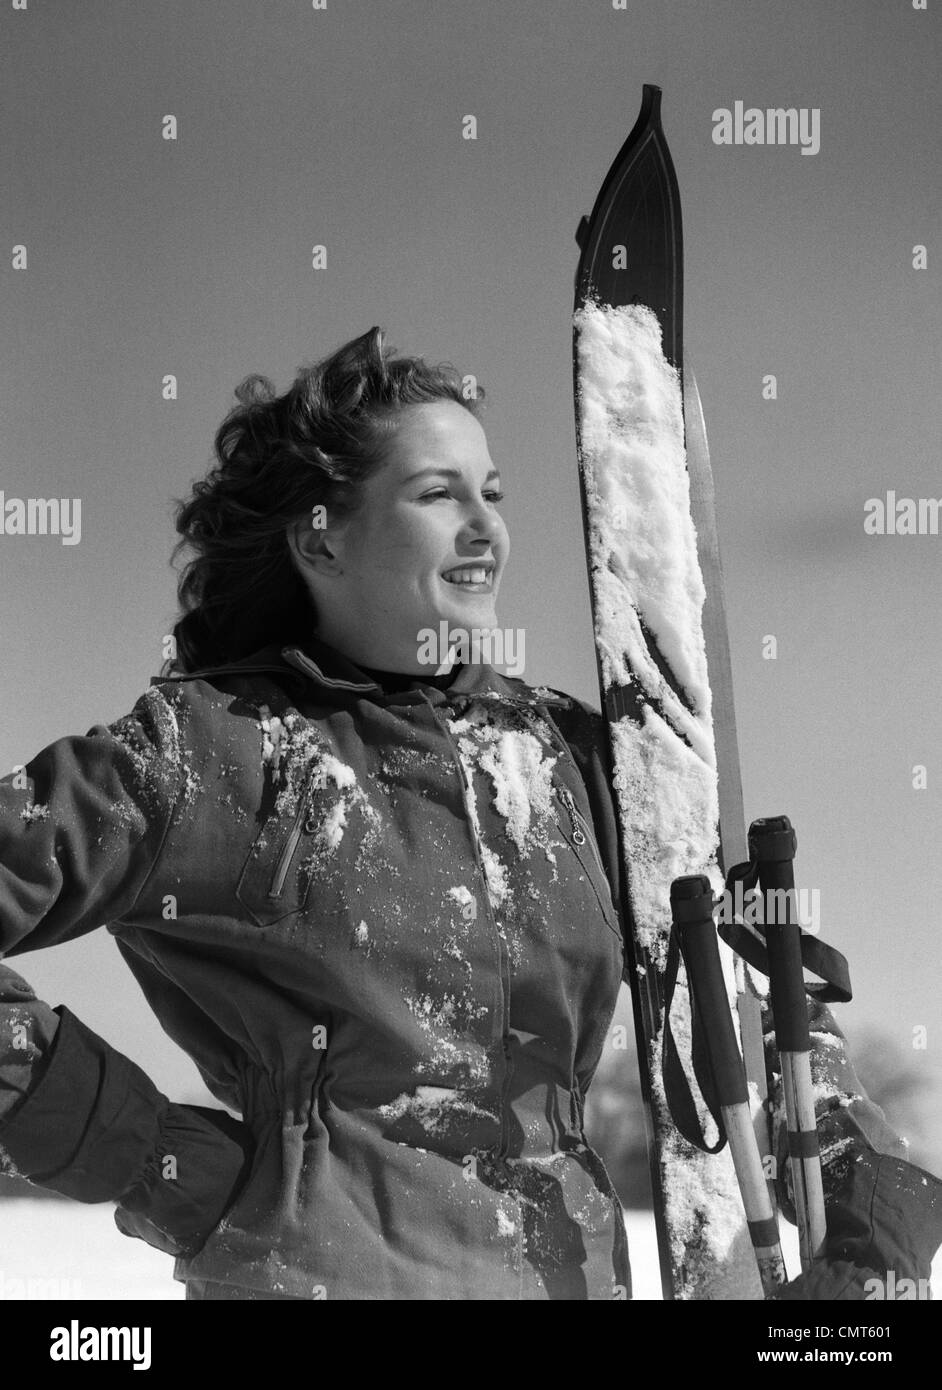 1940s SMILING WOMAN PORTRAIT HOLDING SKIS AND SKI POLES WINTER OUTDOOR Stock Photo